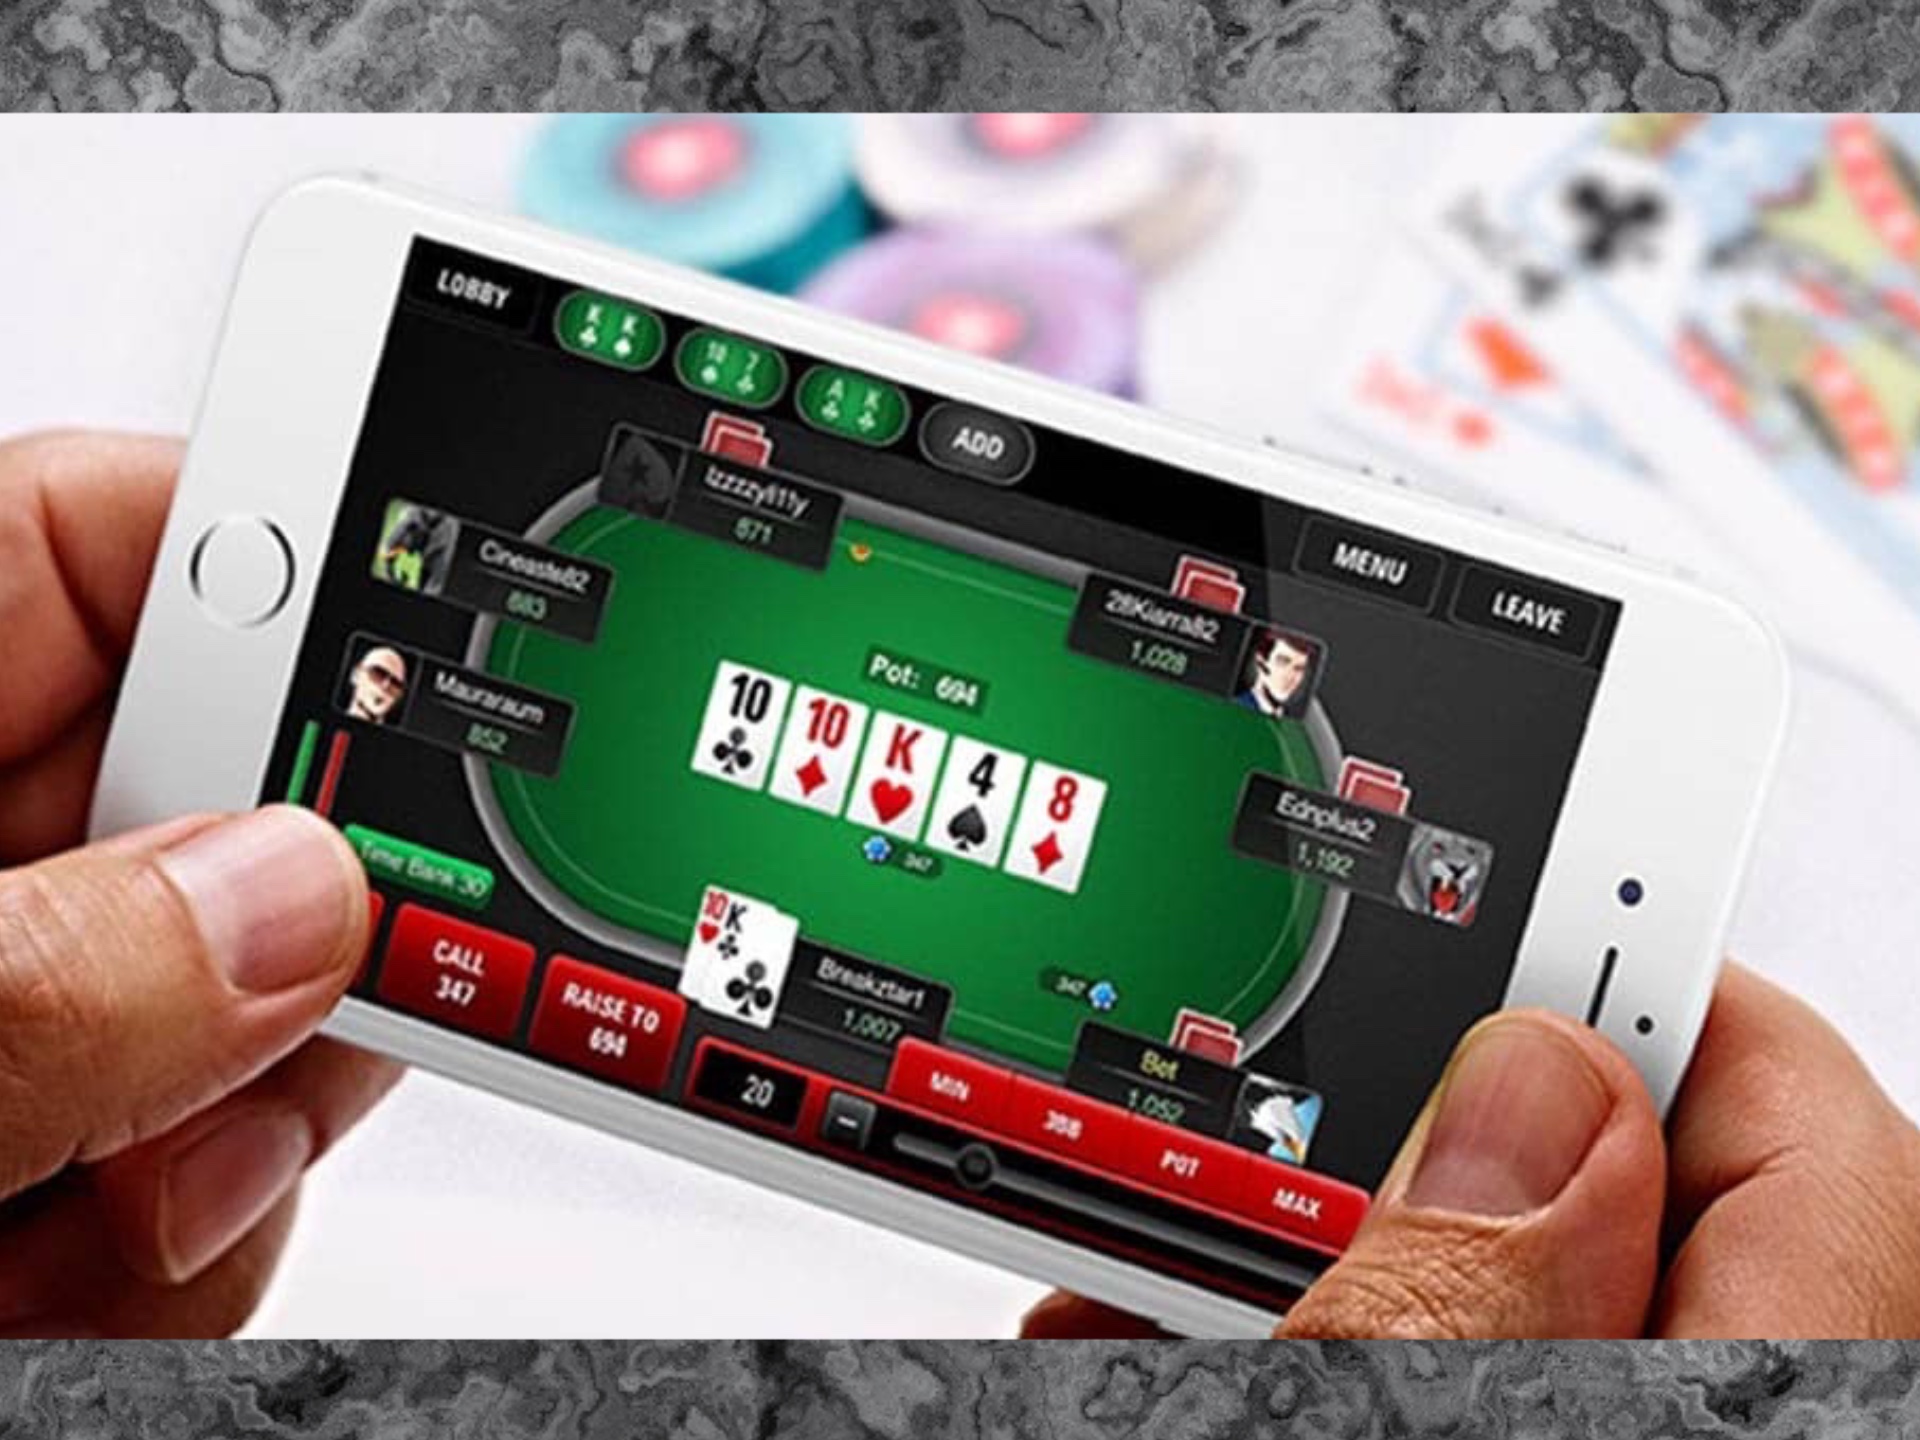 Install a casino's mobile app and play poker online.